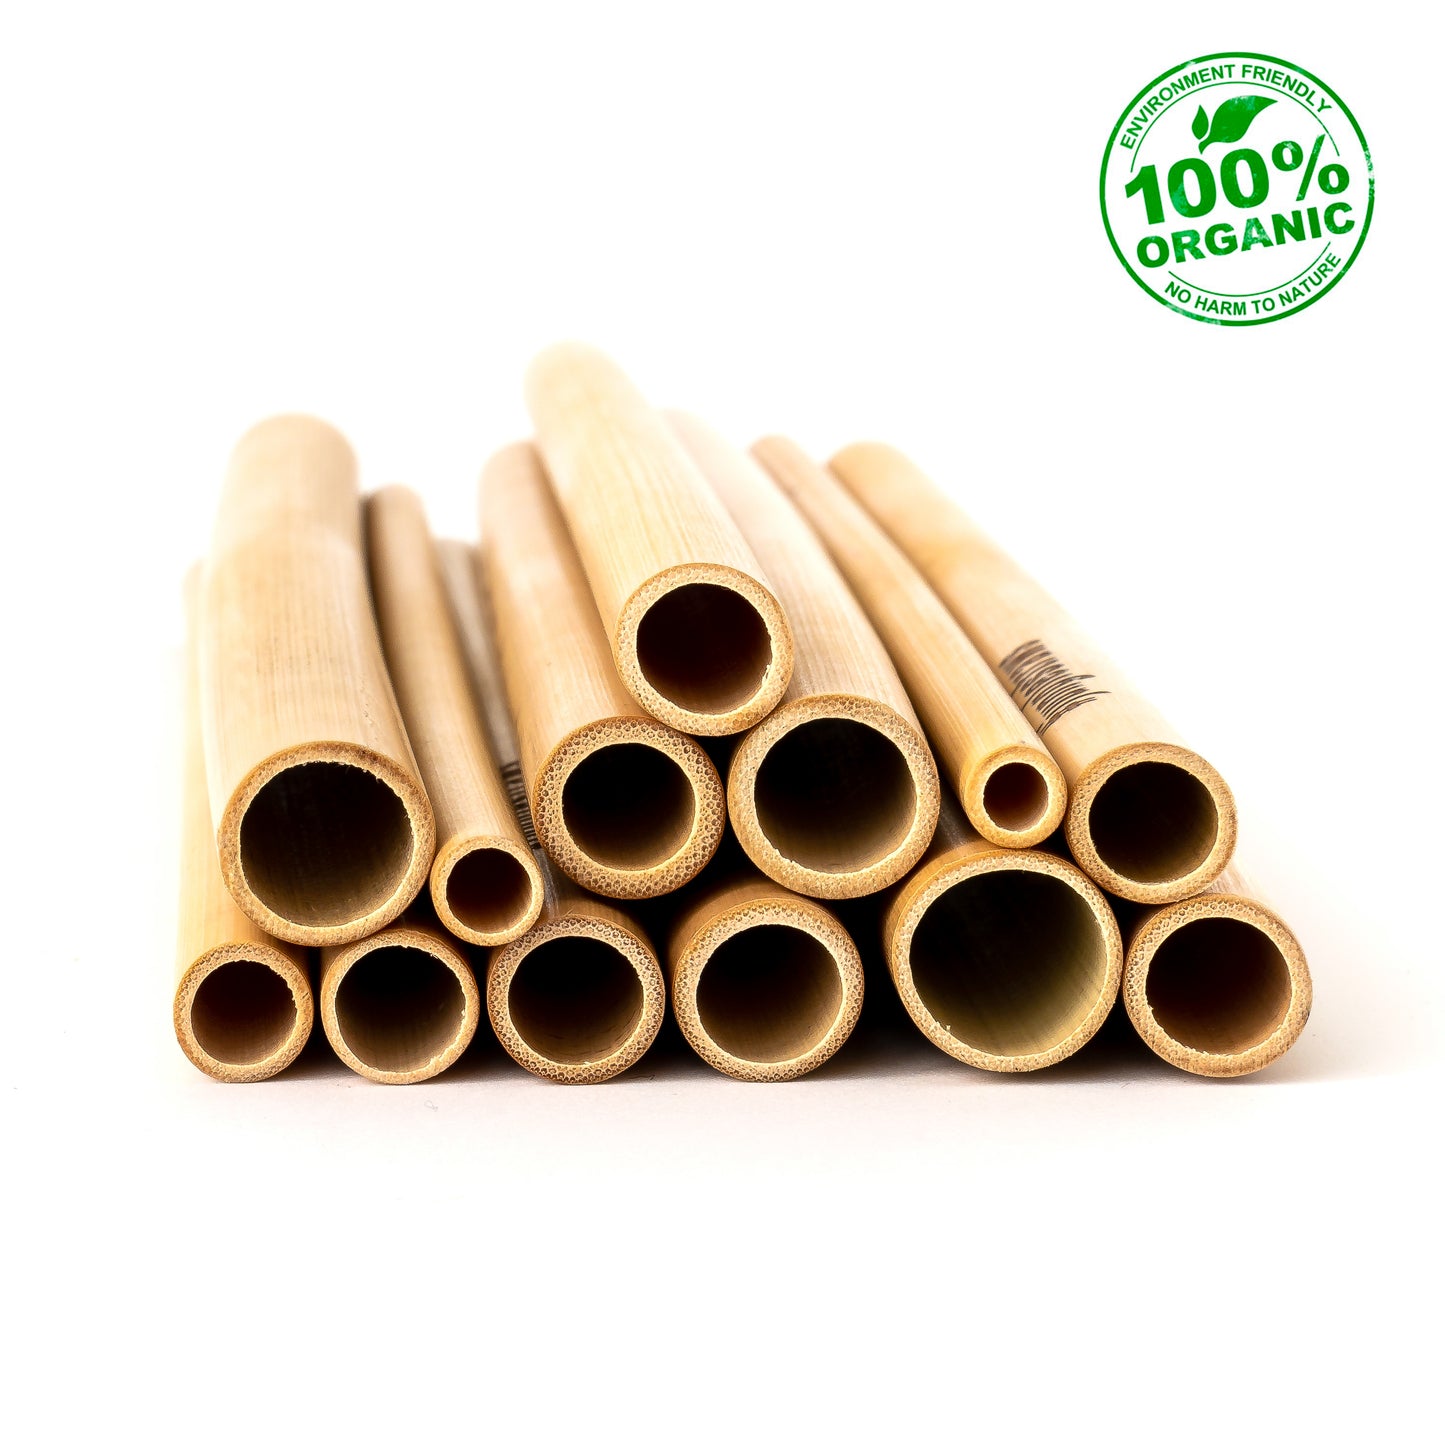 Bamboo Straws and Plastic-Free Straw Cleaners